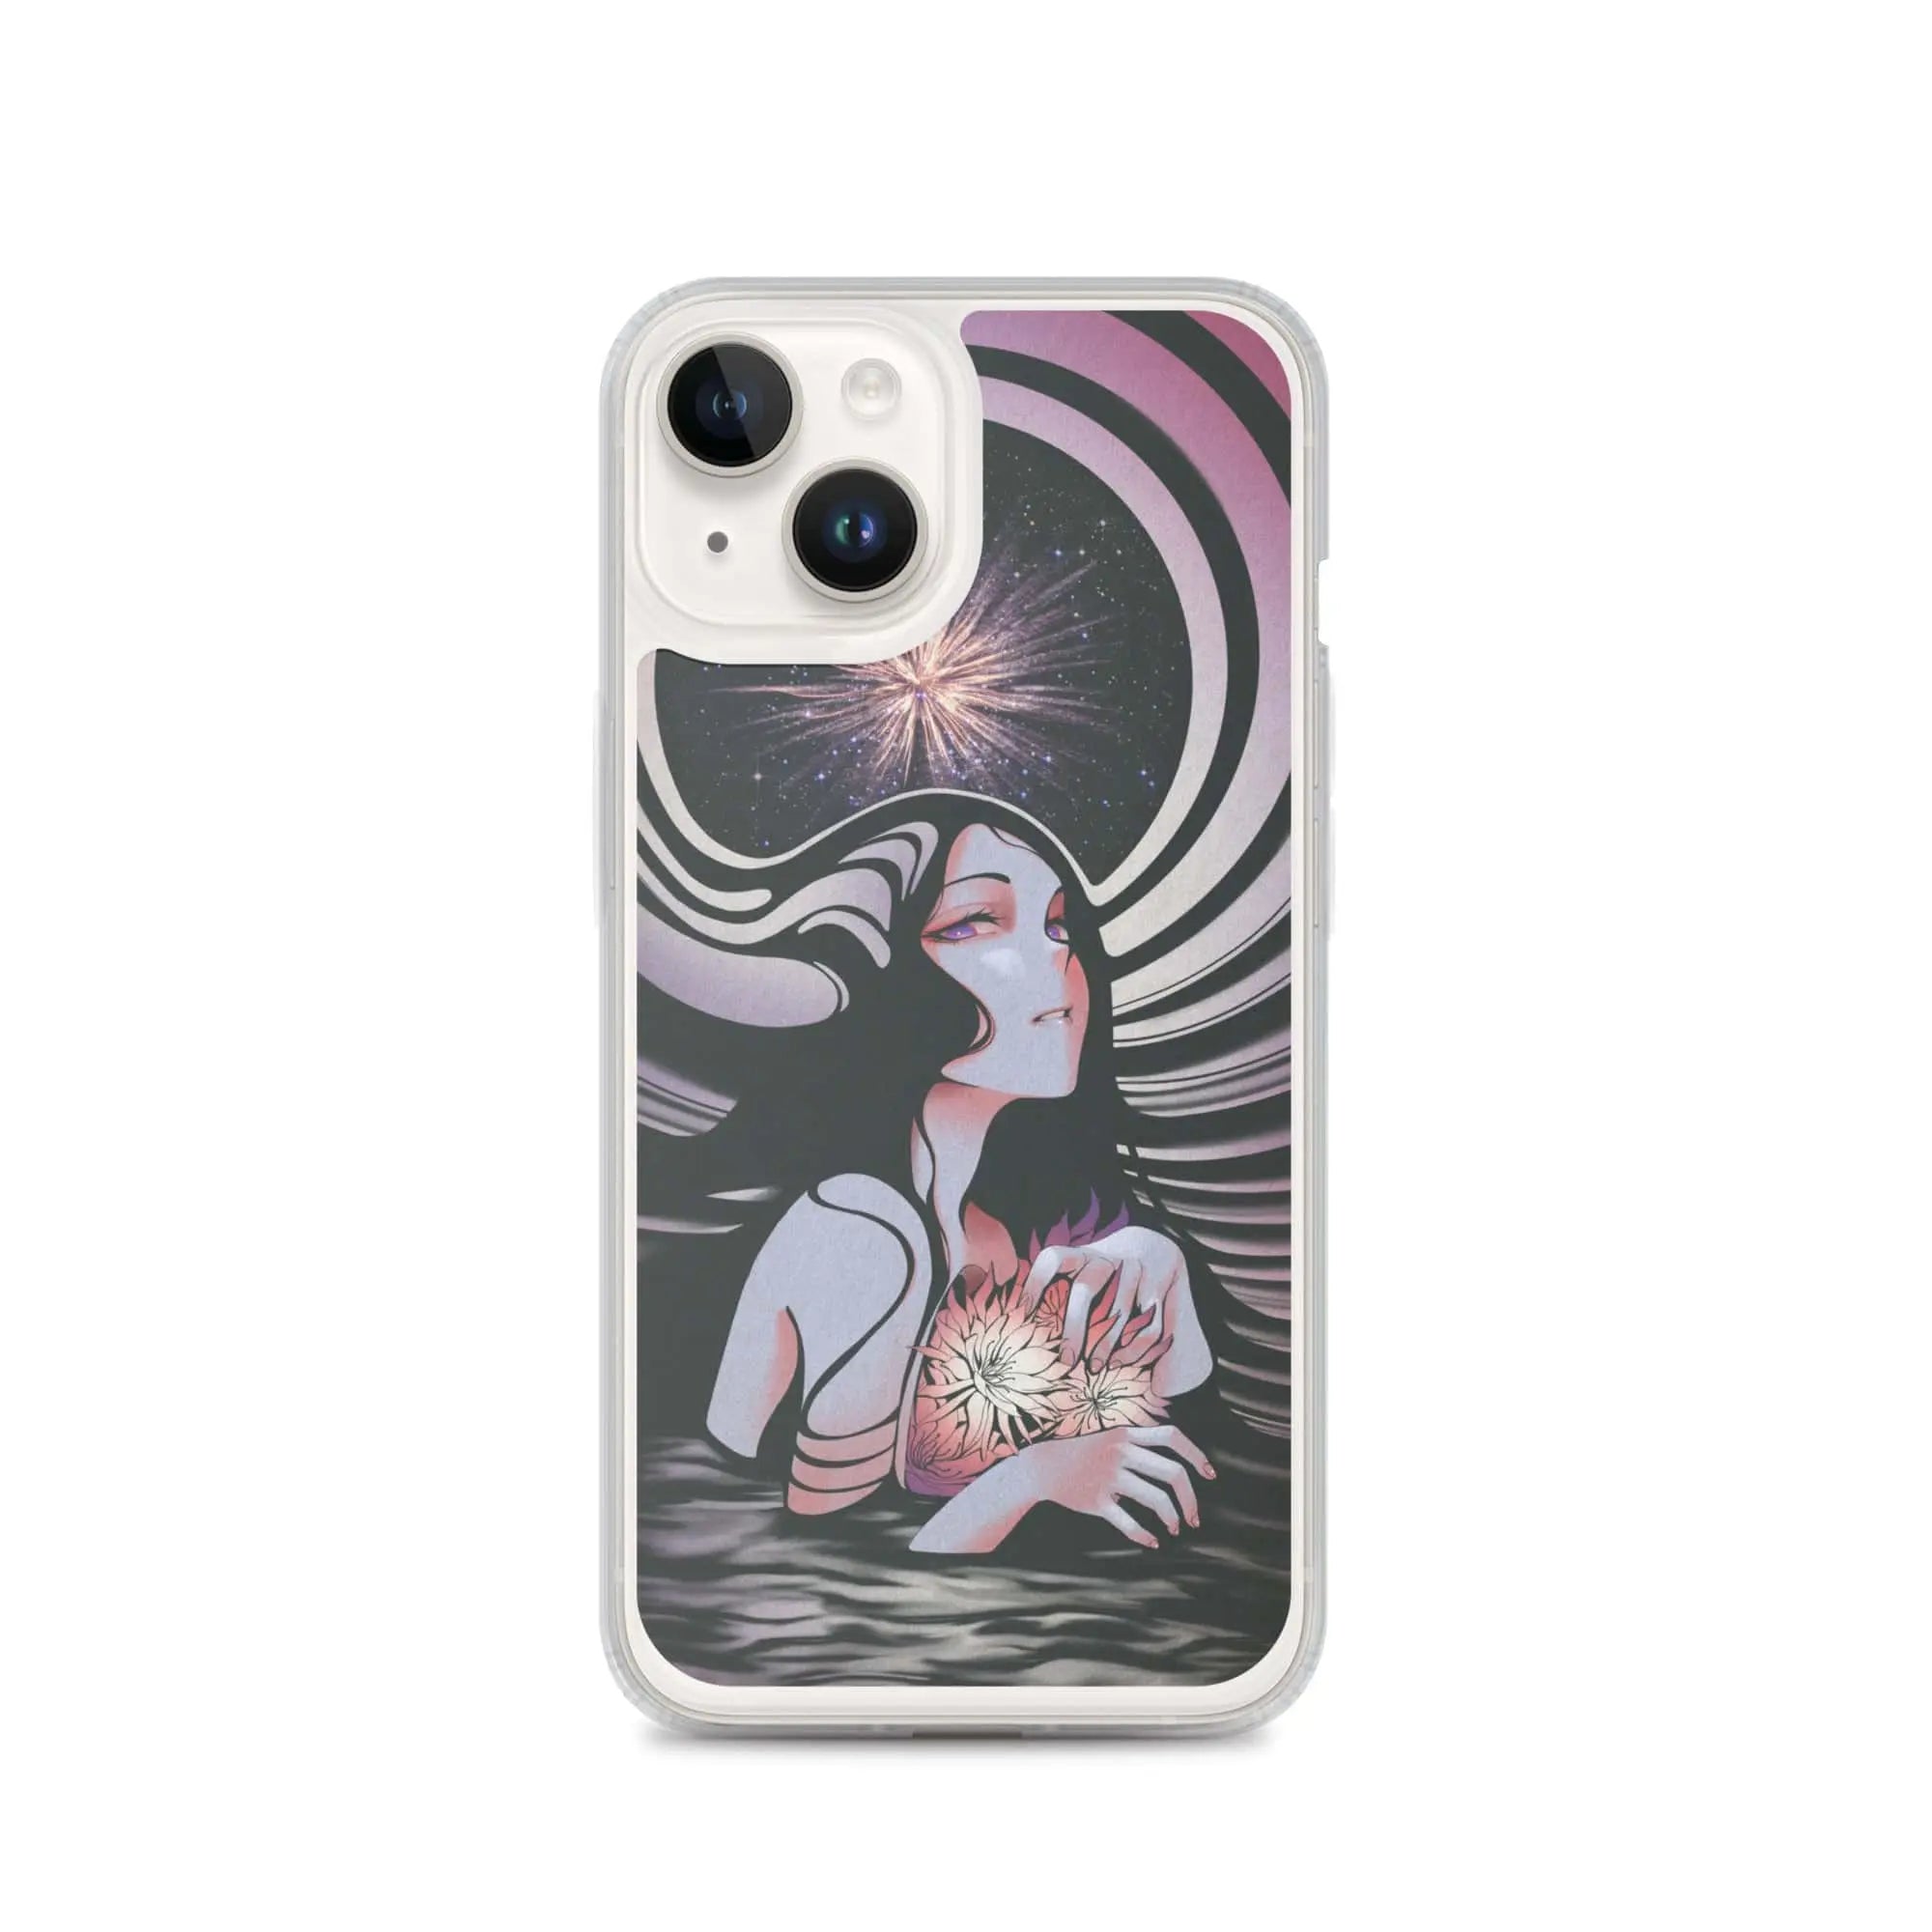 iphone-case-iphone-14-case-on-phone-6361cd9ddc4bc.jpg